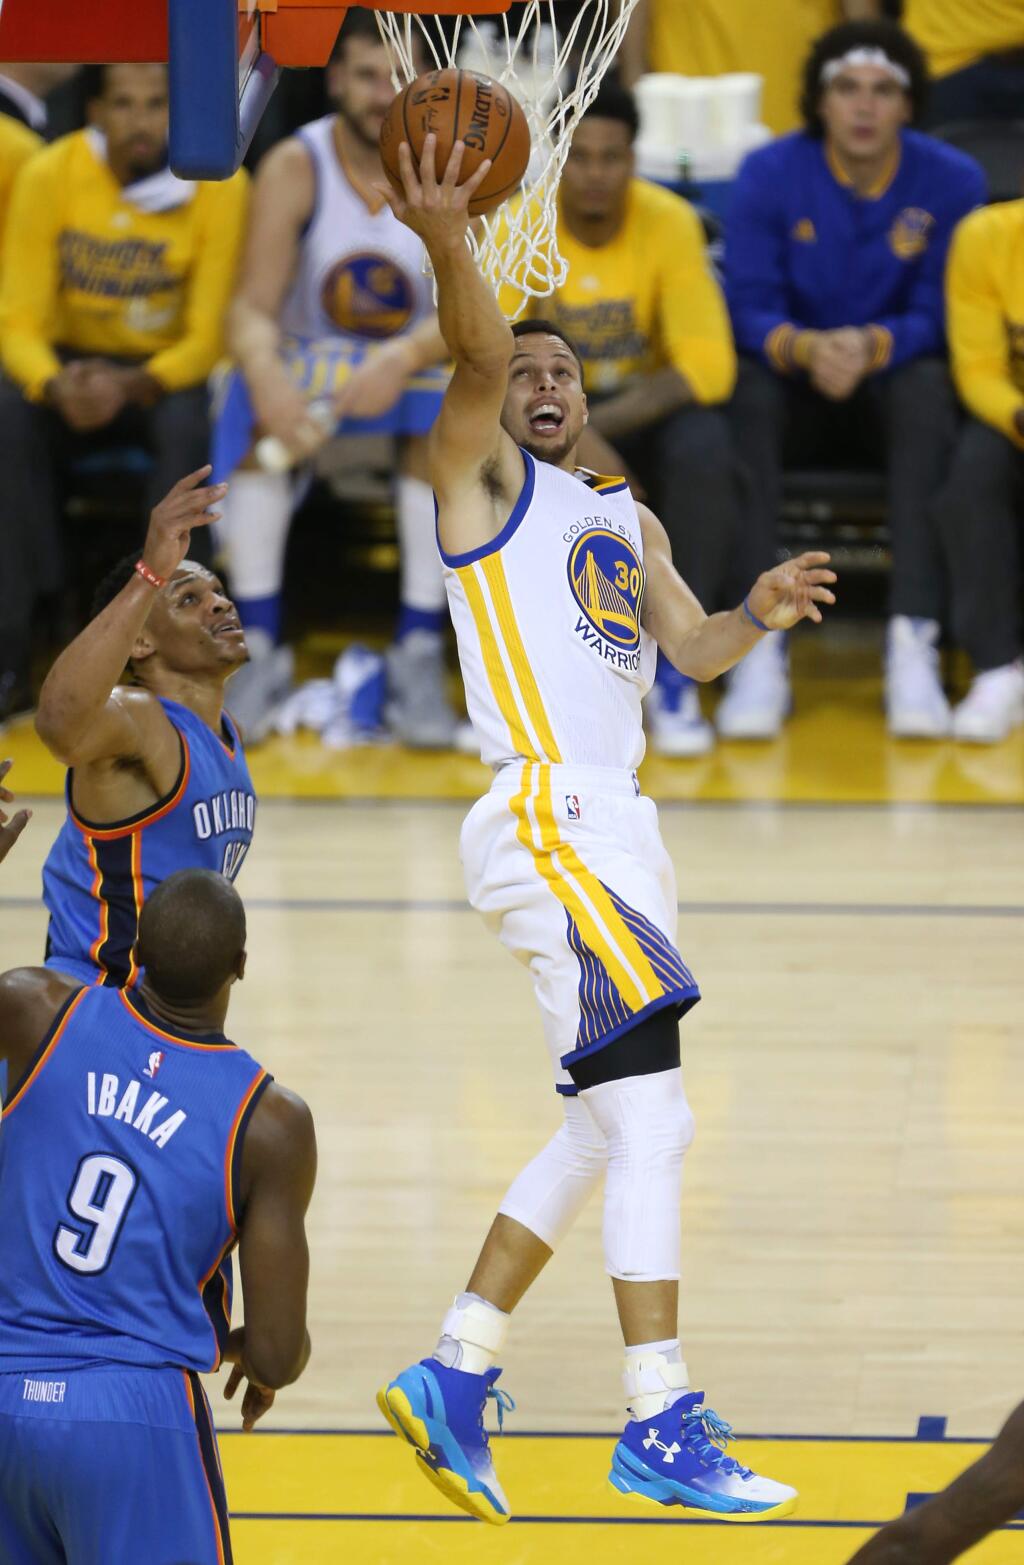 Golden State Warriors' Stephen Curry scores a basket against Oklahoma City Thunder's Russell Westbrook, during their game in Oakland on Monday, May 30, 2016. (Christopher Chung/ The Press Democrat)